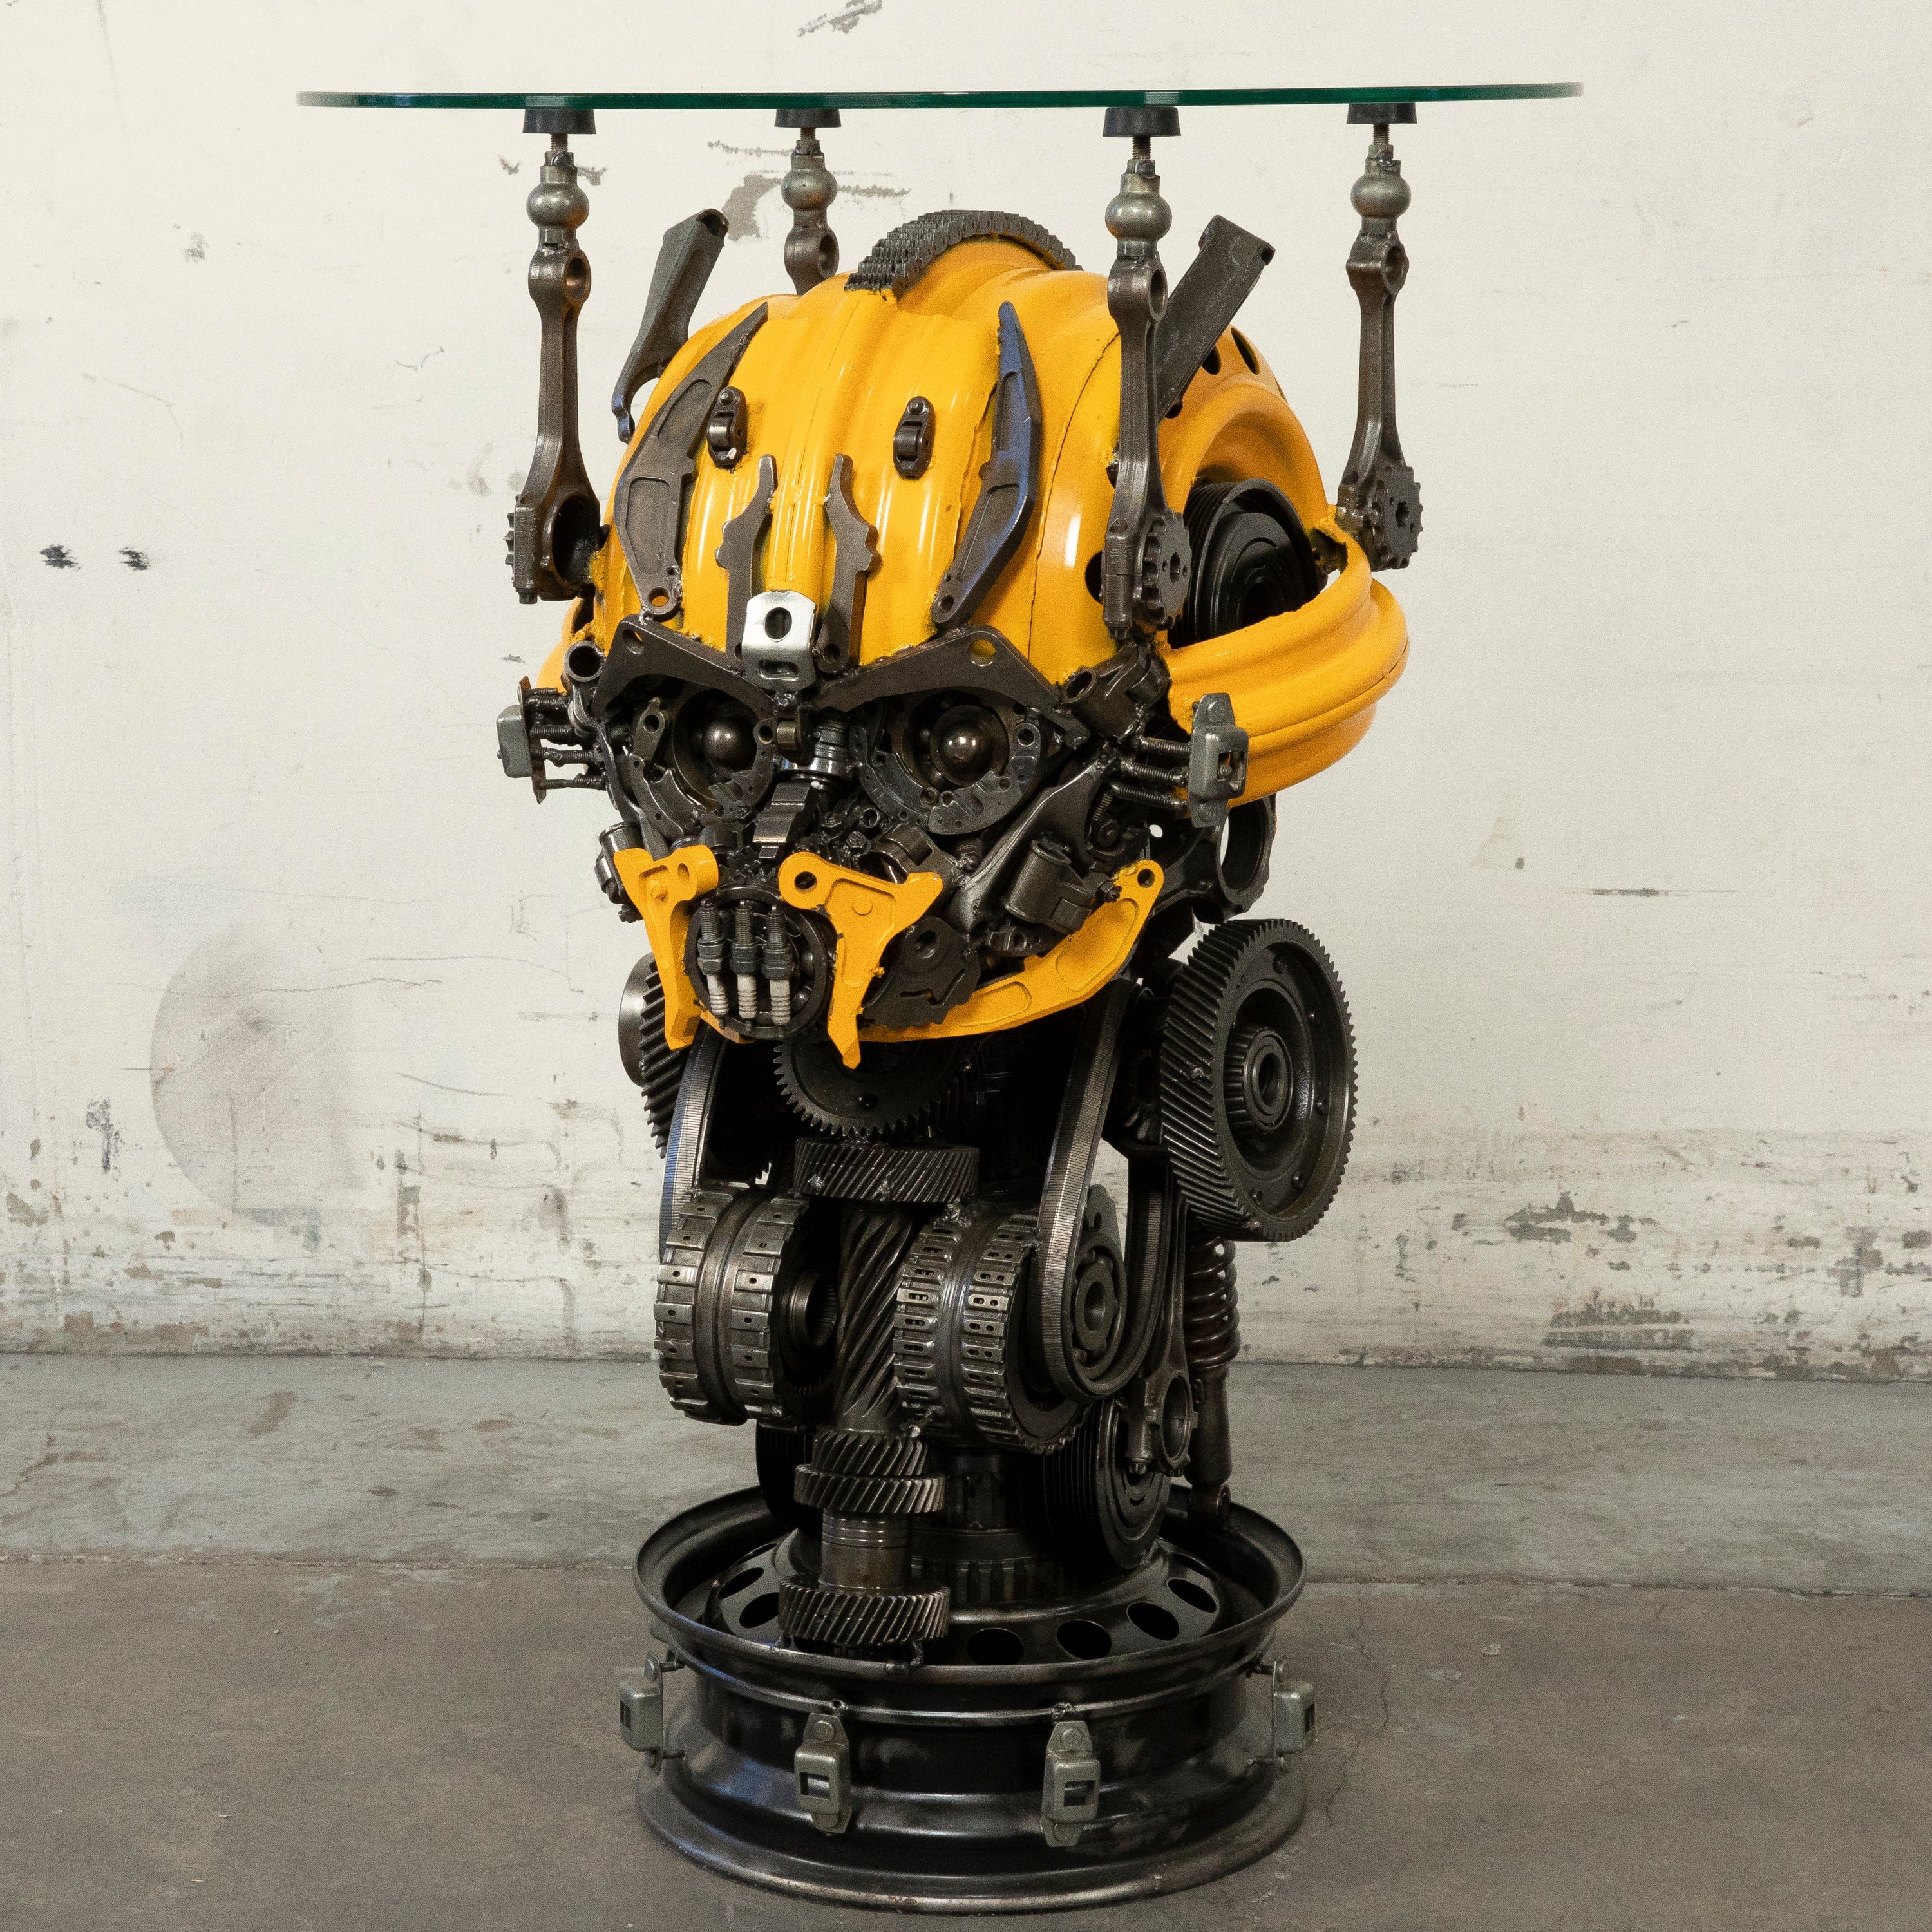 Kalifano Recycled Metal Art 36" Bumblebee Inspired Recycled Metal Sculpture Table RMS-BBTAB90-S03